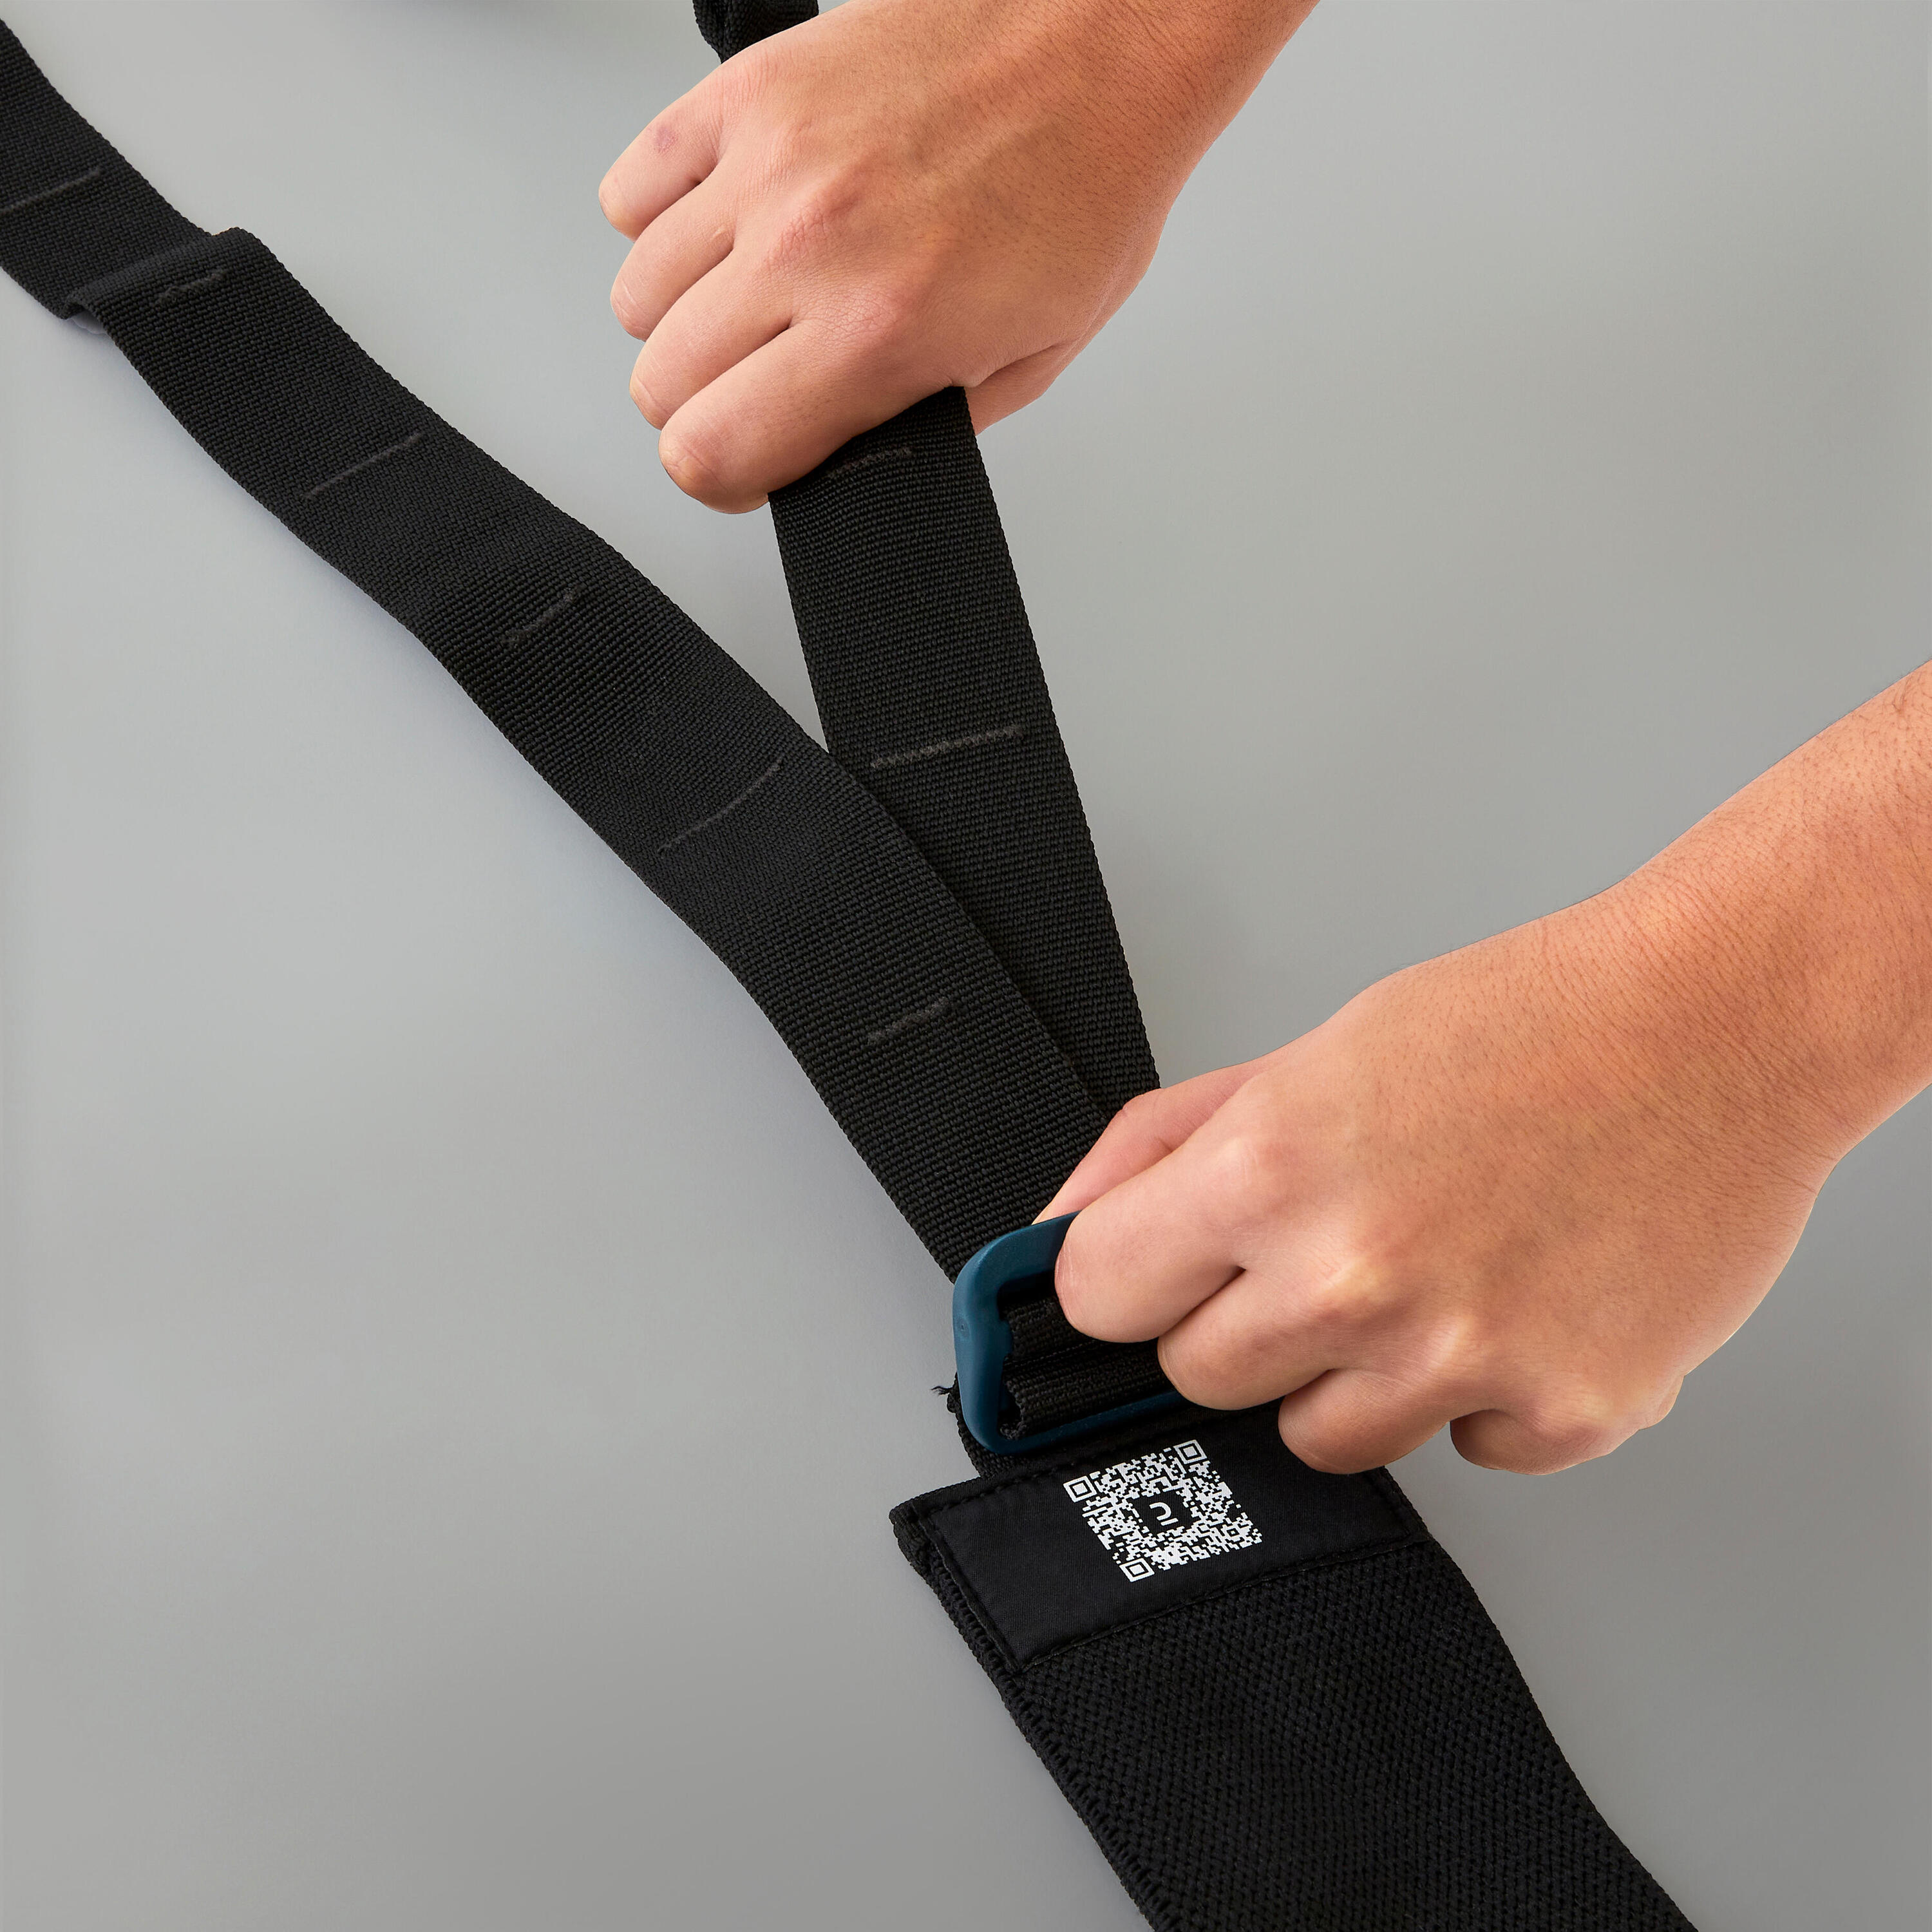 Adjustable Band for Pull-Up Assistance 8/9